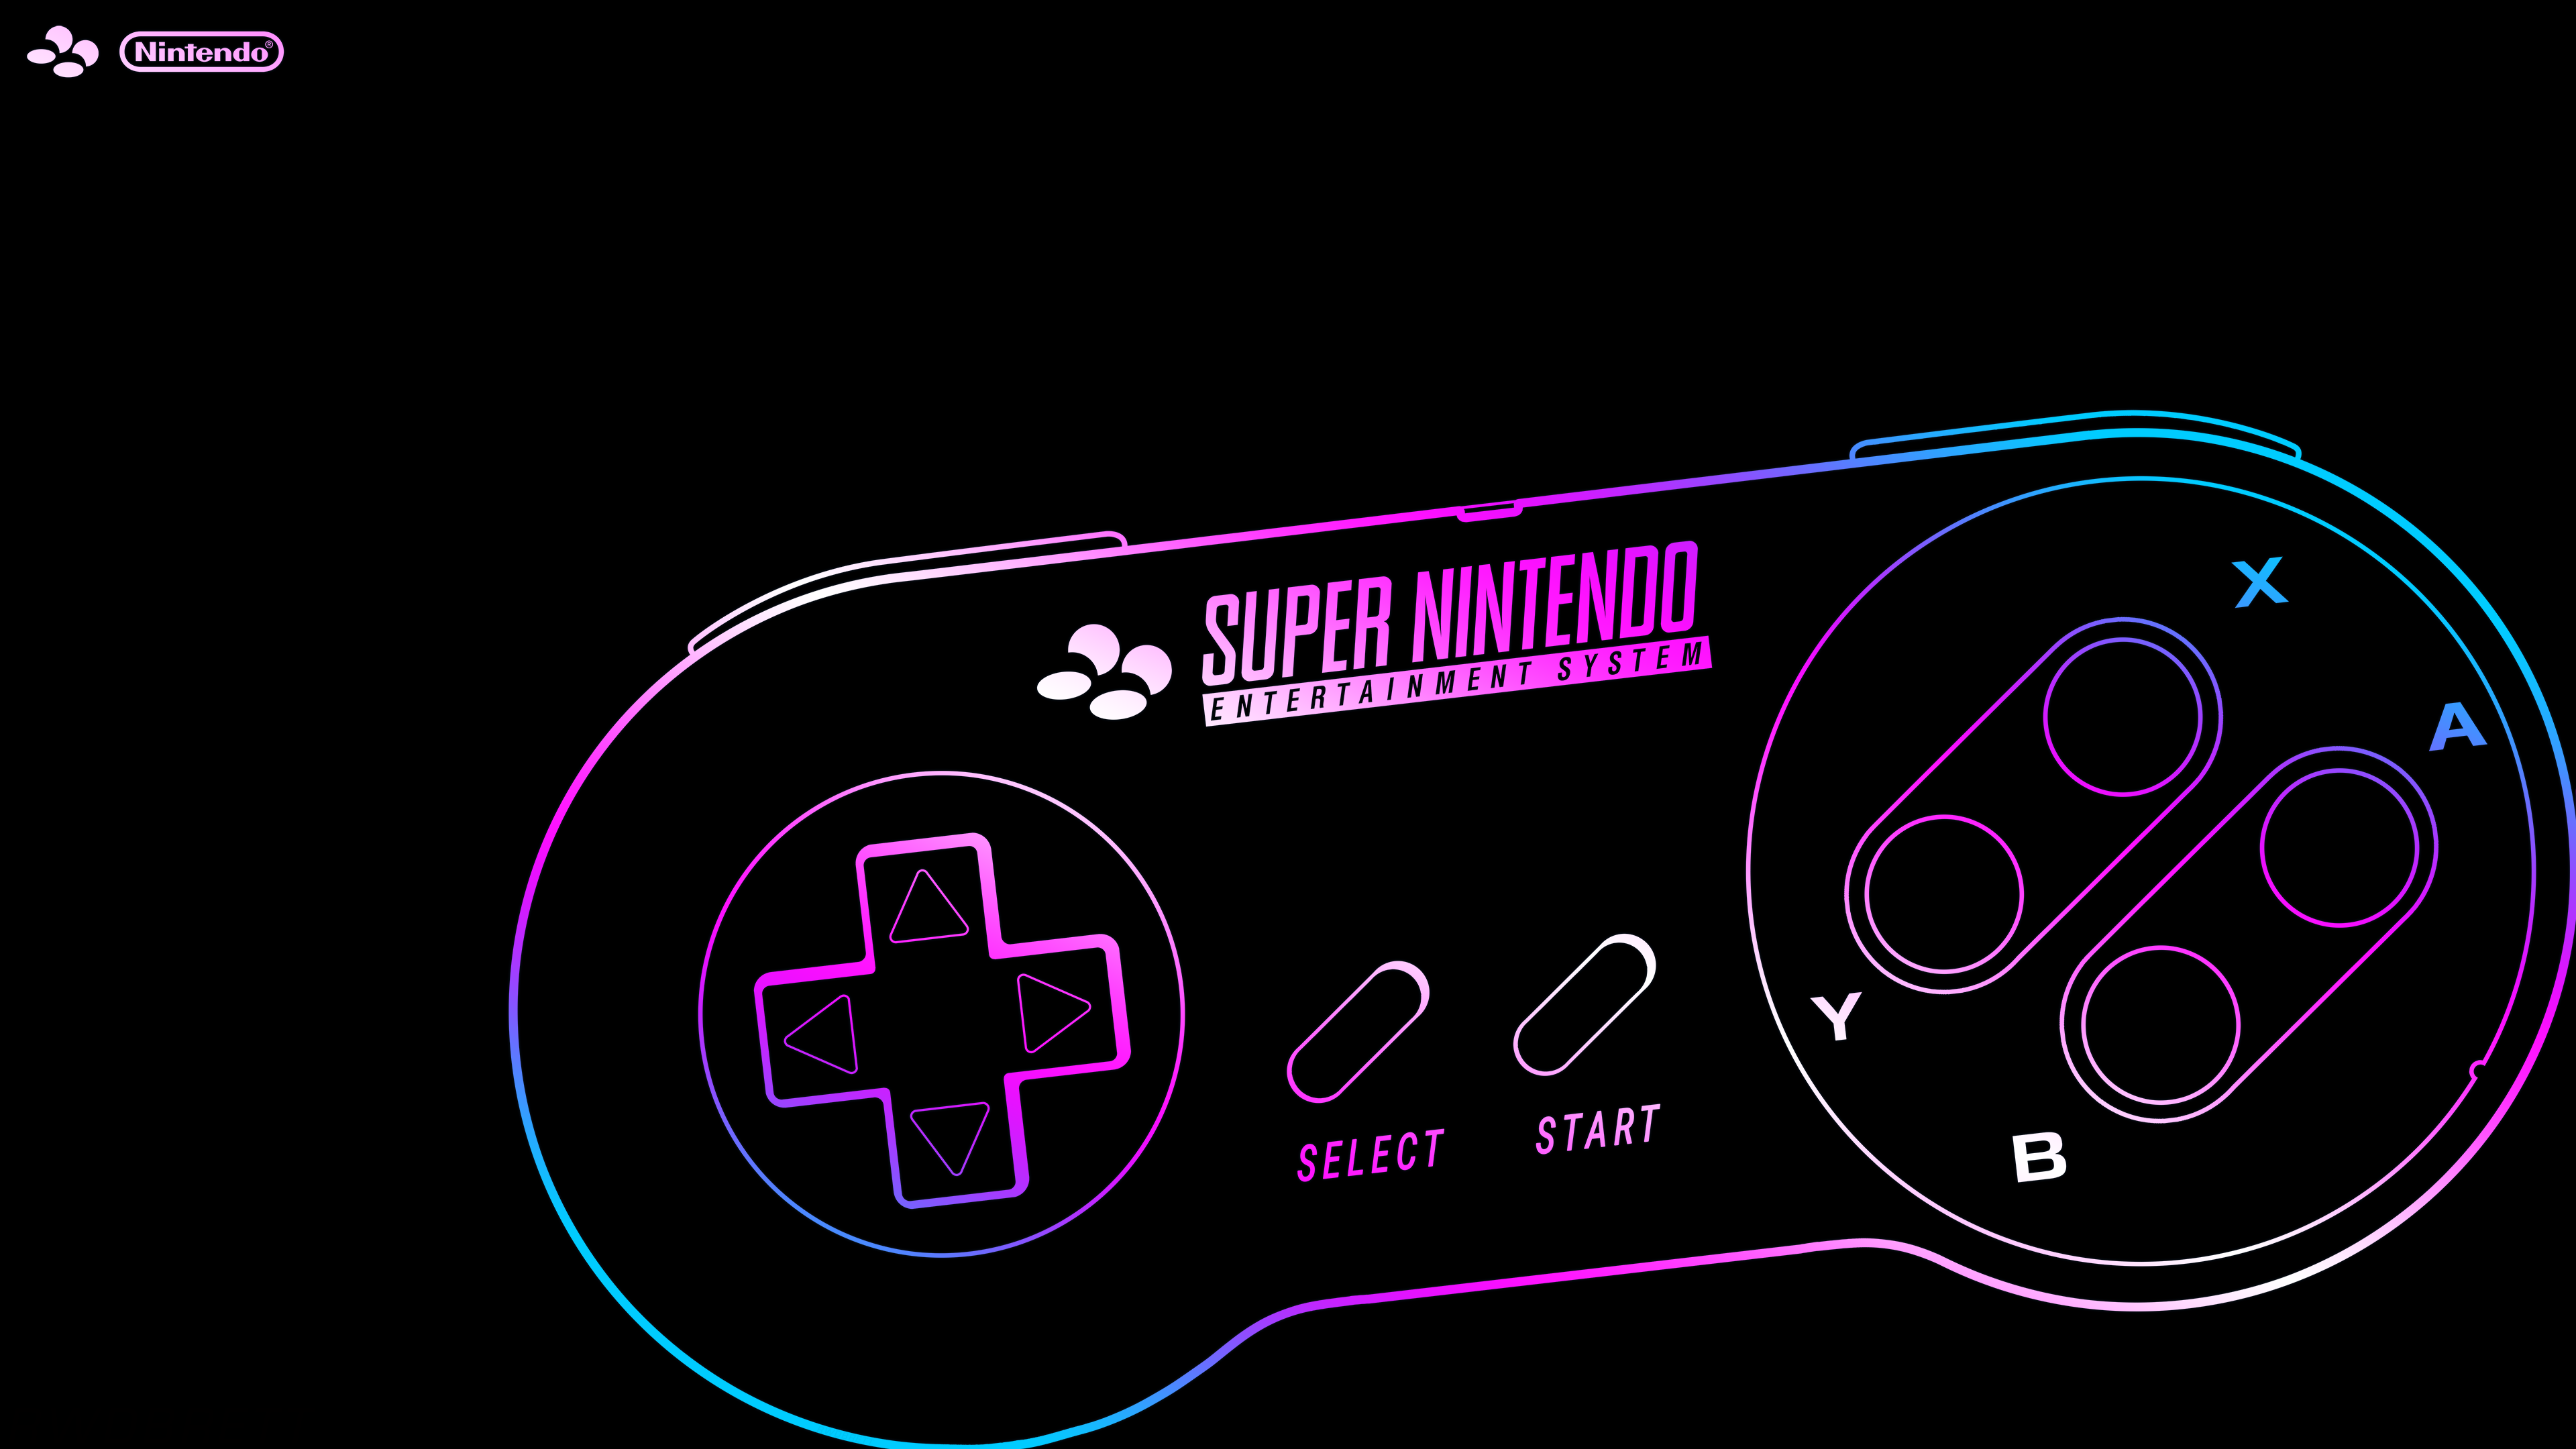 4K, synthwave, controllers, simple background, black background, logo, SNES, retro games, Nintendo, video games HD Wallpaper